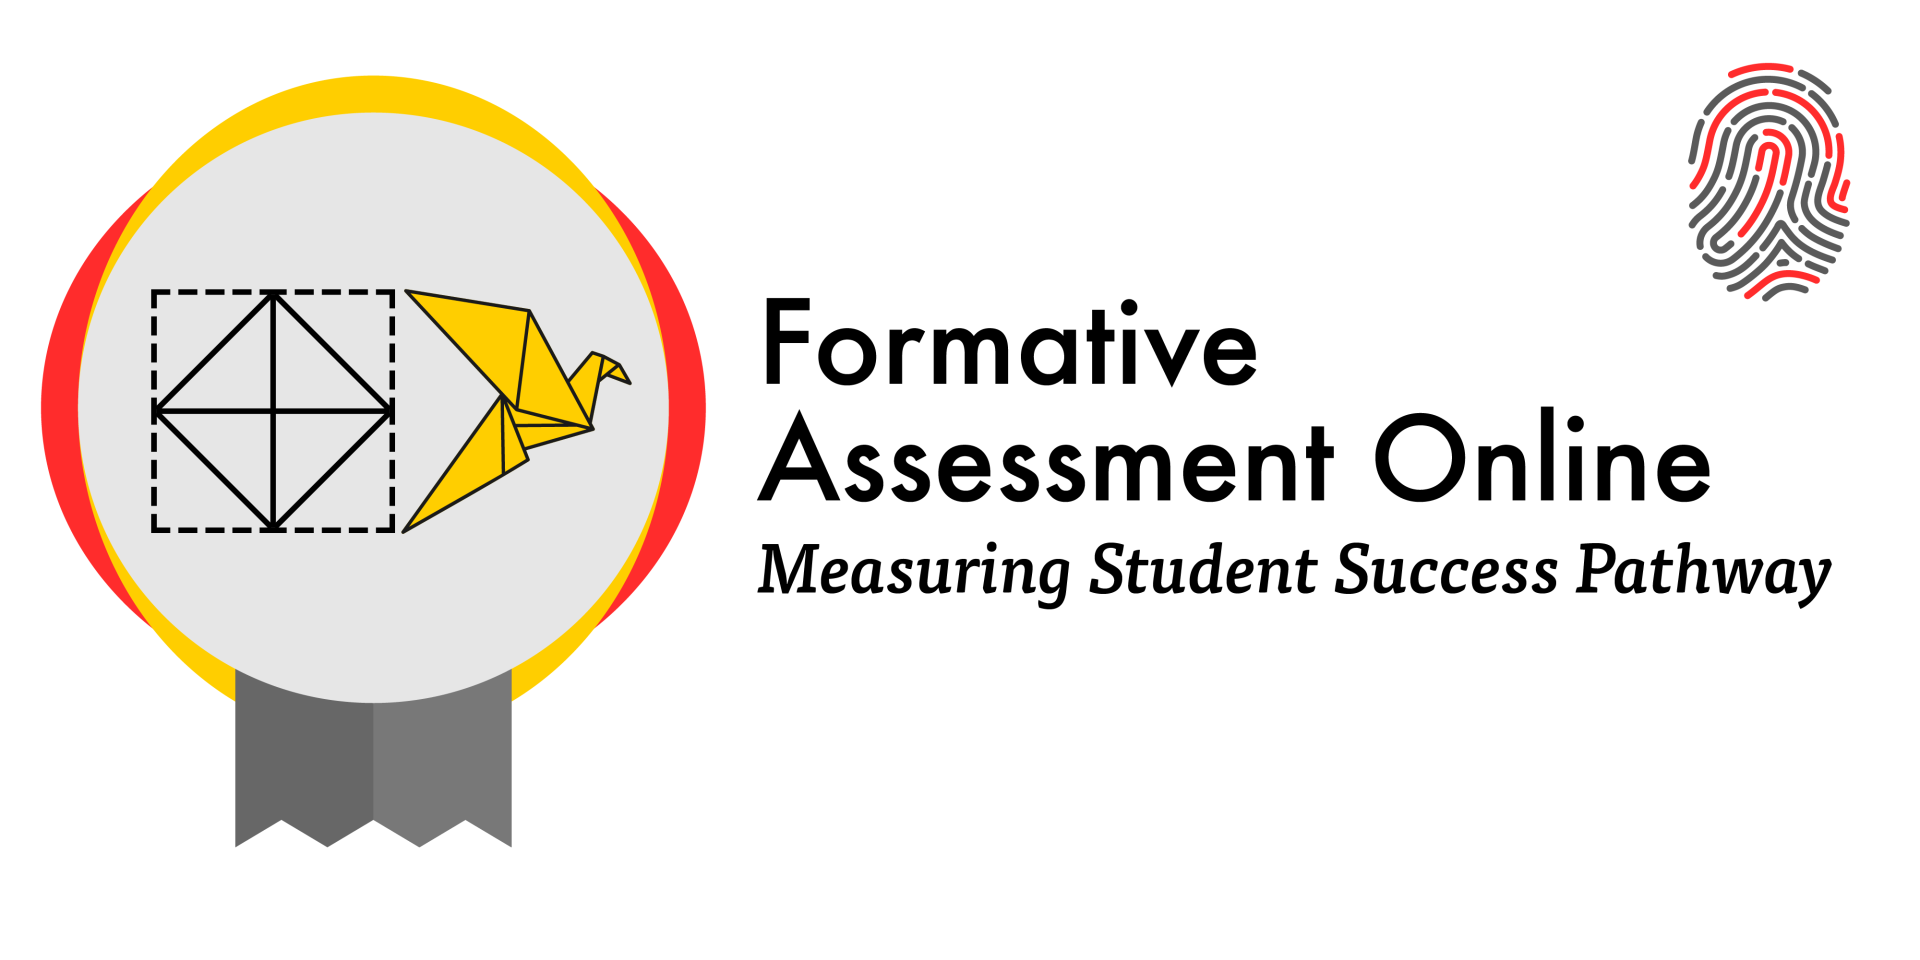 Formative Assessment Online, Measuring Student Success Pathway